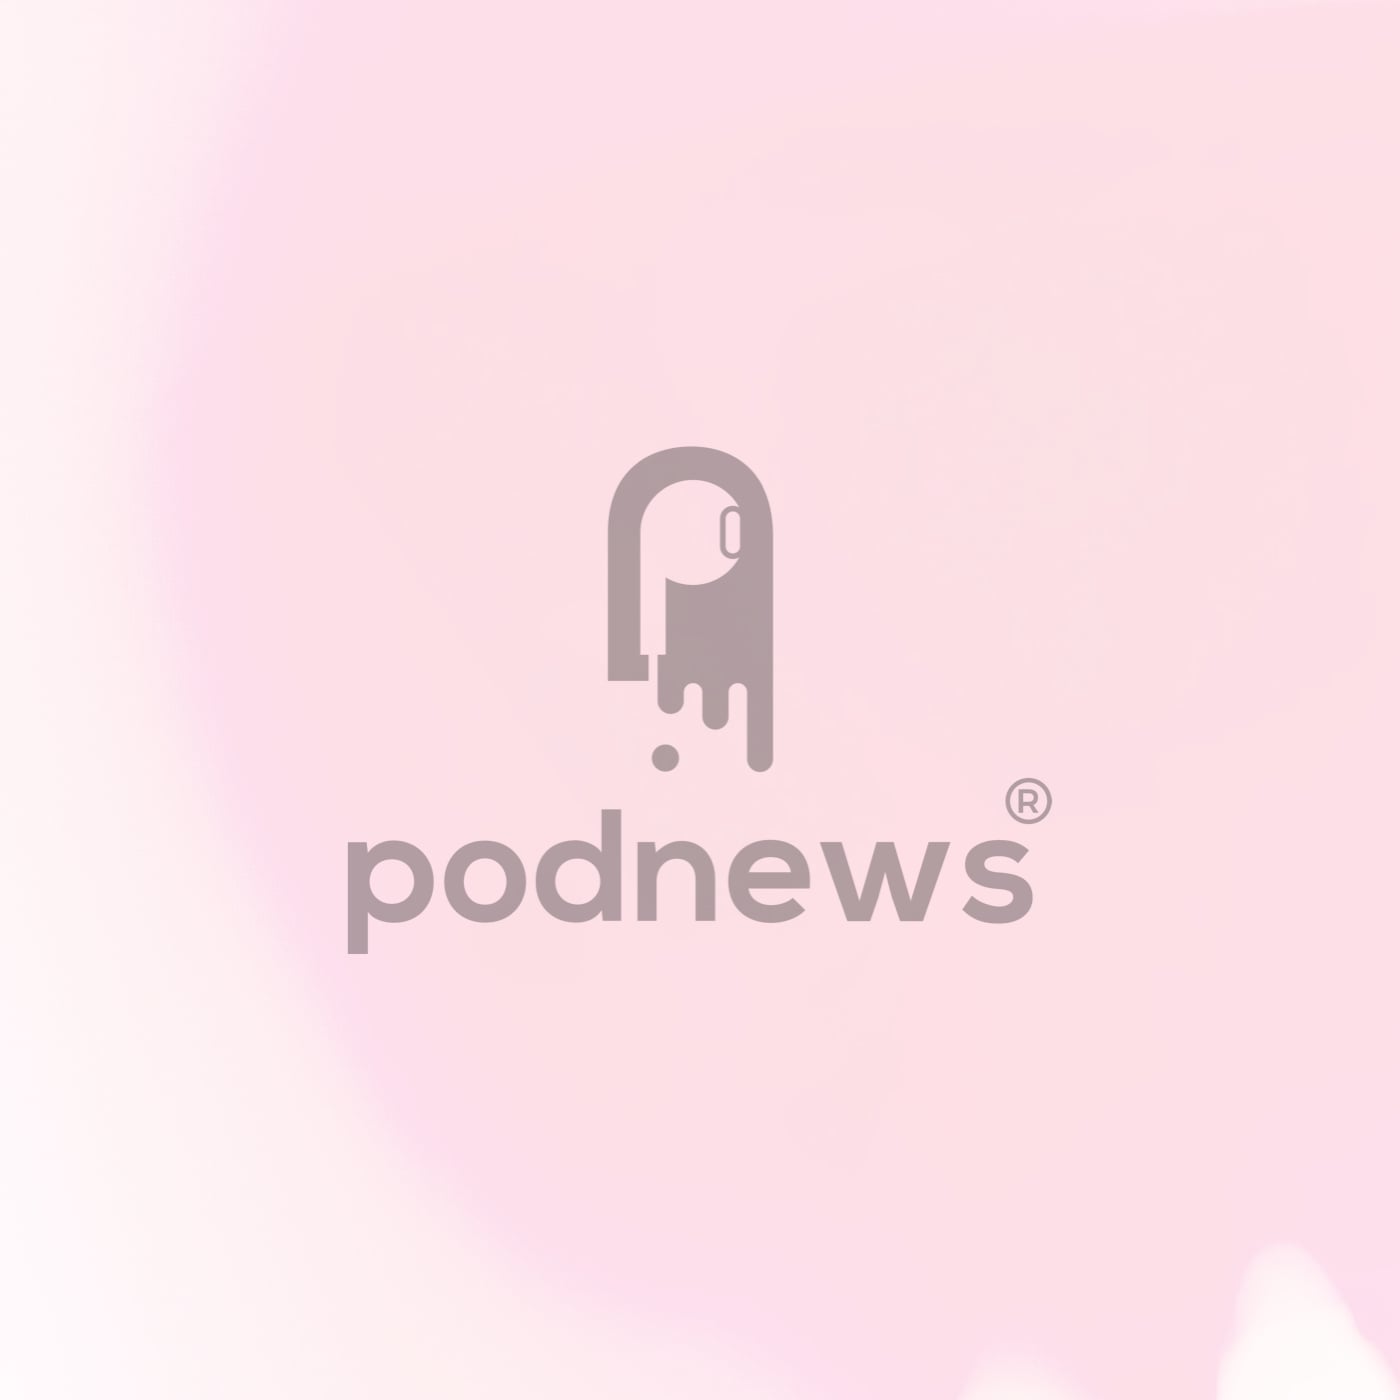 Your podcast in Podnews